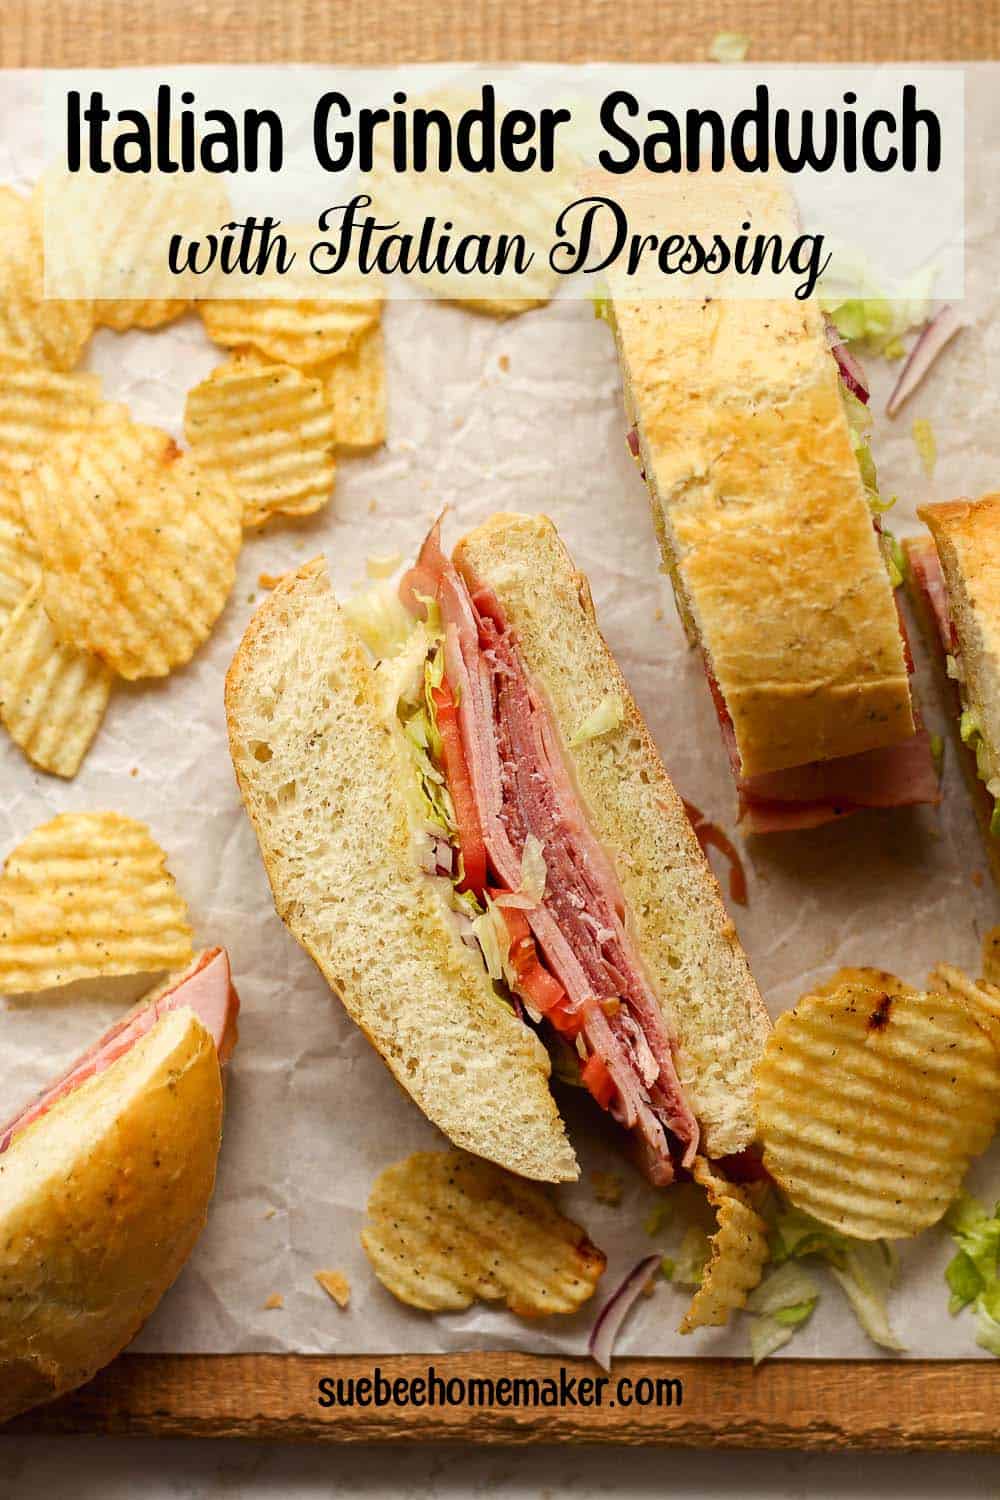 Some sliced Italian grinder sandwiches with chips.